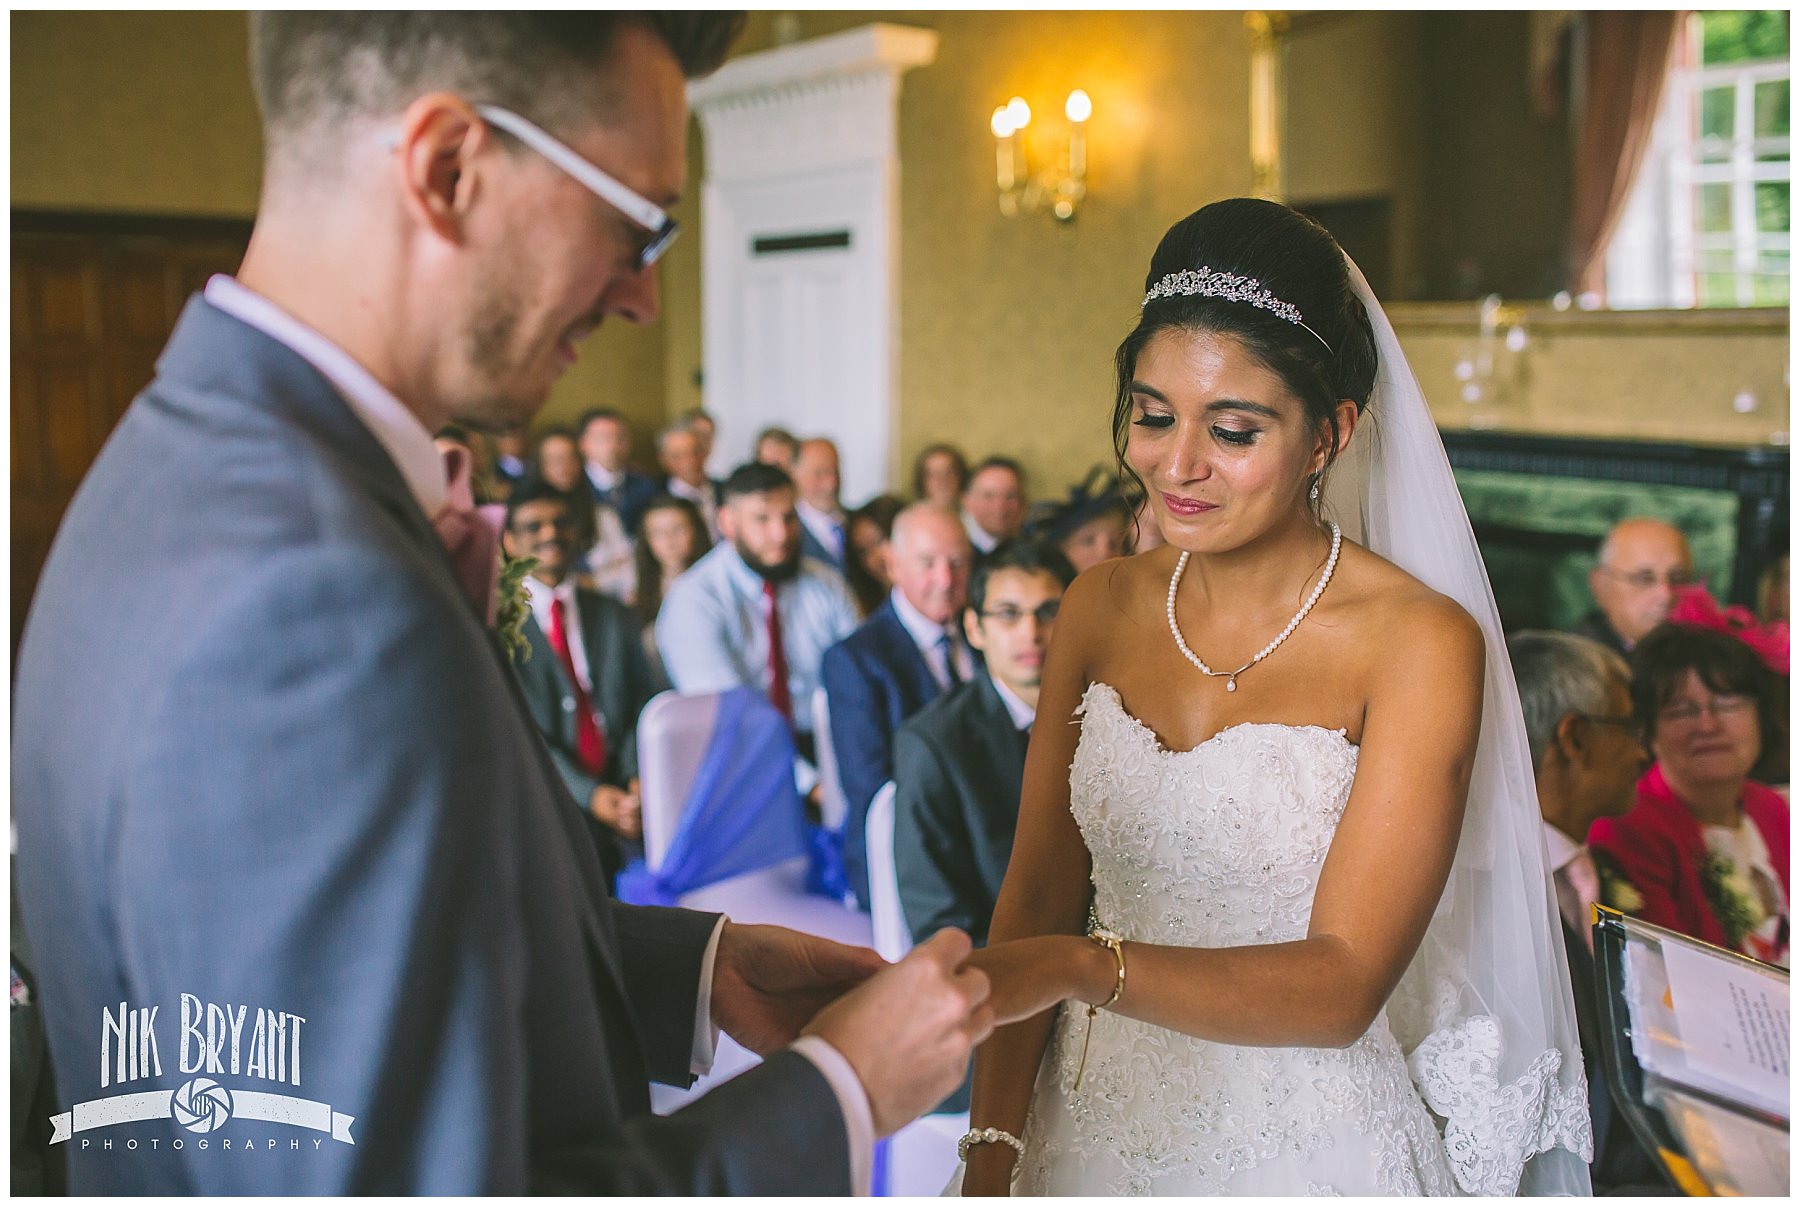 Bride and groom exchange rings during wedding ceremony